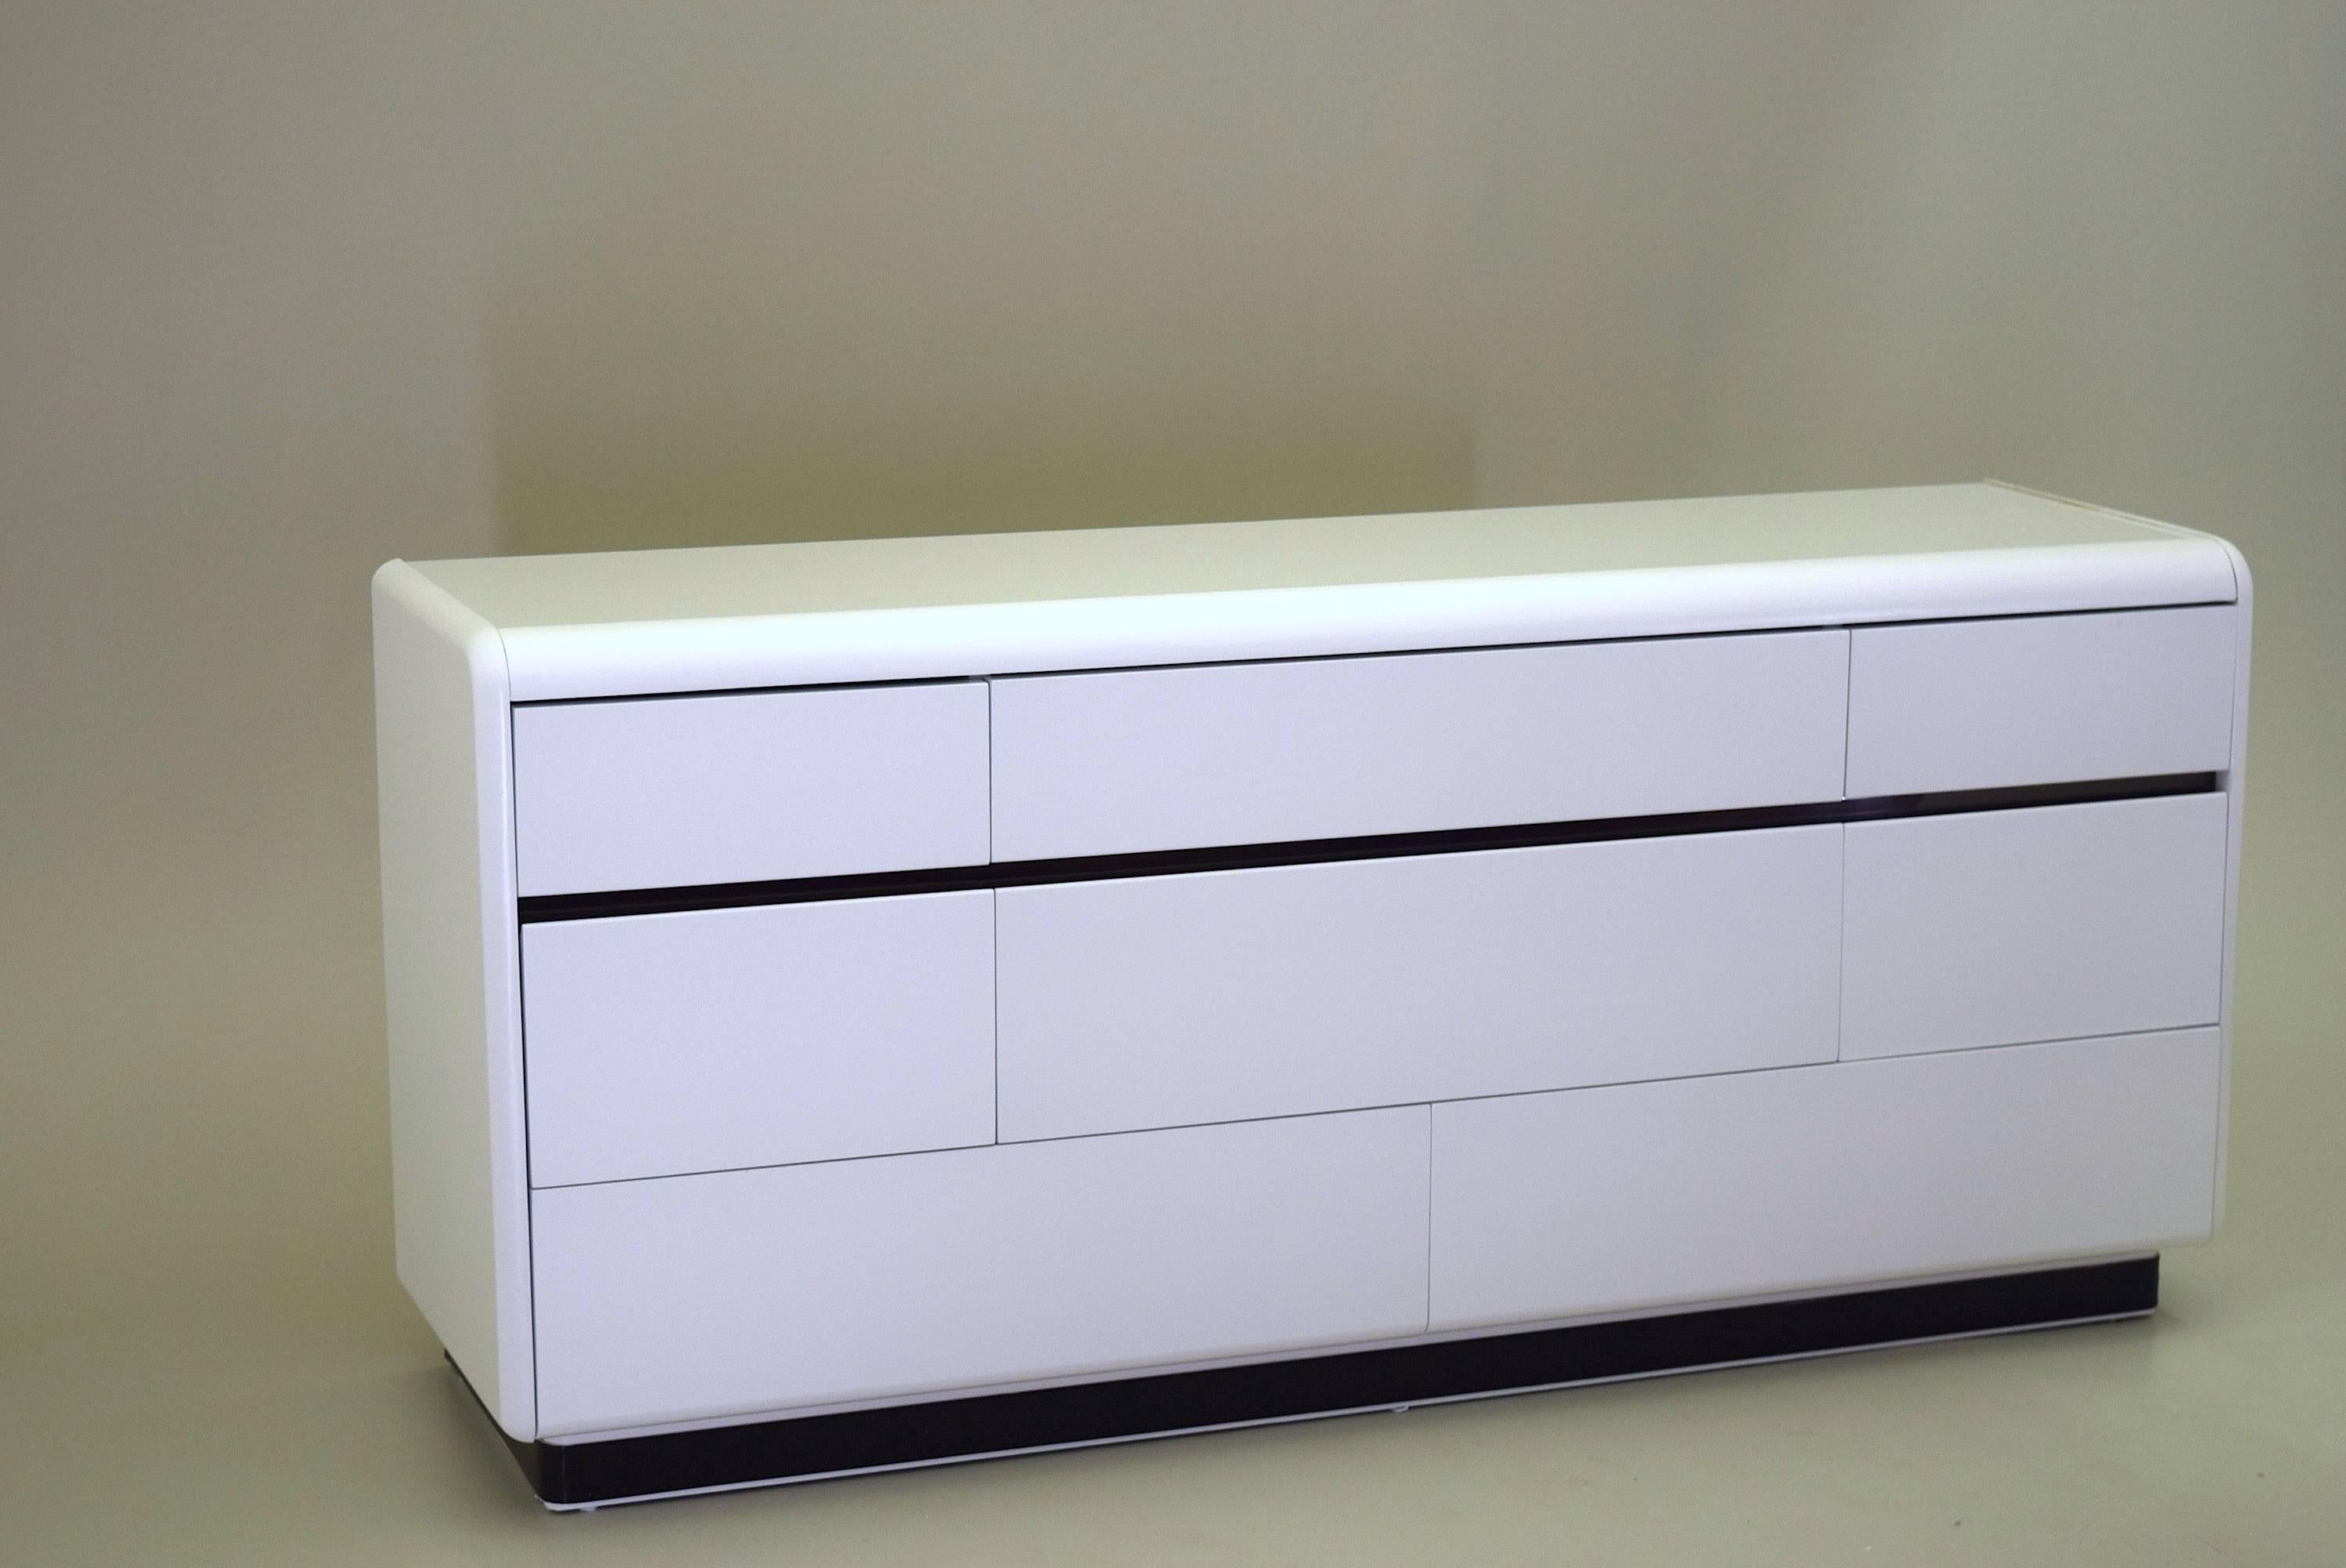 Price is for dresser and nightstand. 

A set of very difficult to find mid century designs by Lane Furniture. Produced circa 1970-1980 these modernist pieces are finished in beautiful white lacquer with the tops featuring a high gloss smooth